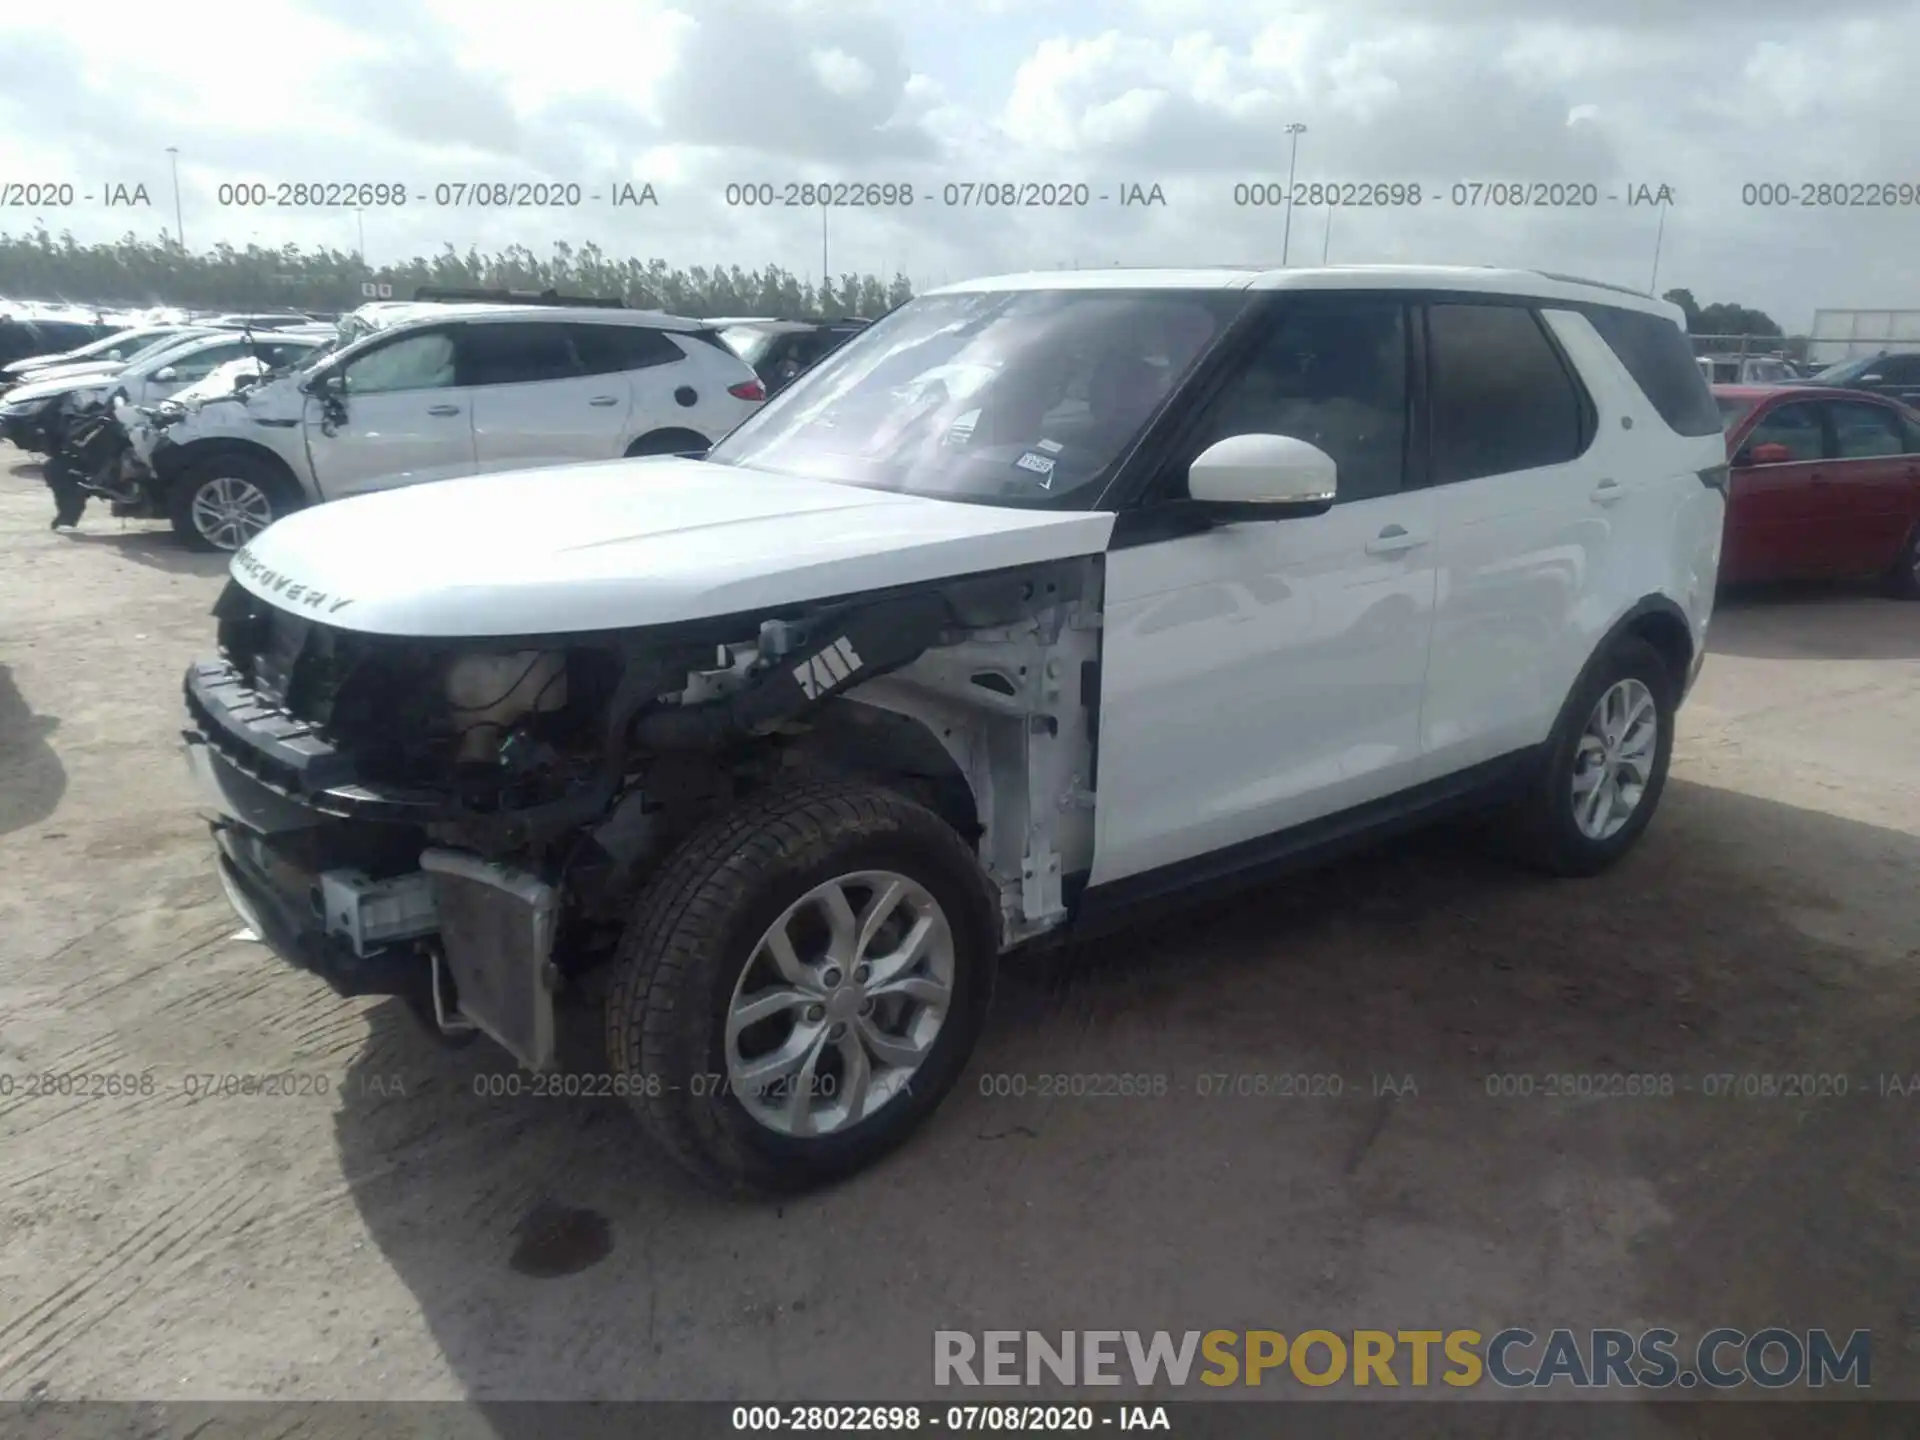 2 Photograph of a damaged car SALRG2RV3L2426232 LAND ROVER DISCOVERY 2020